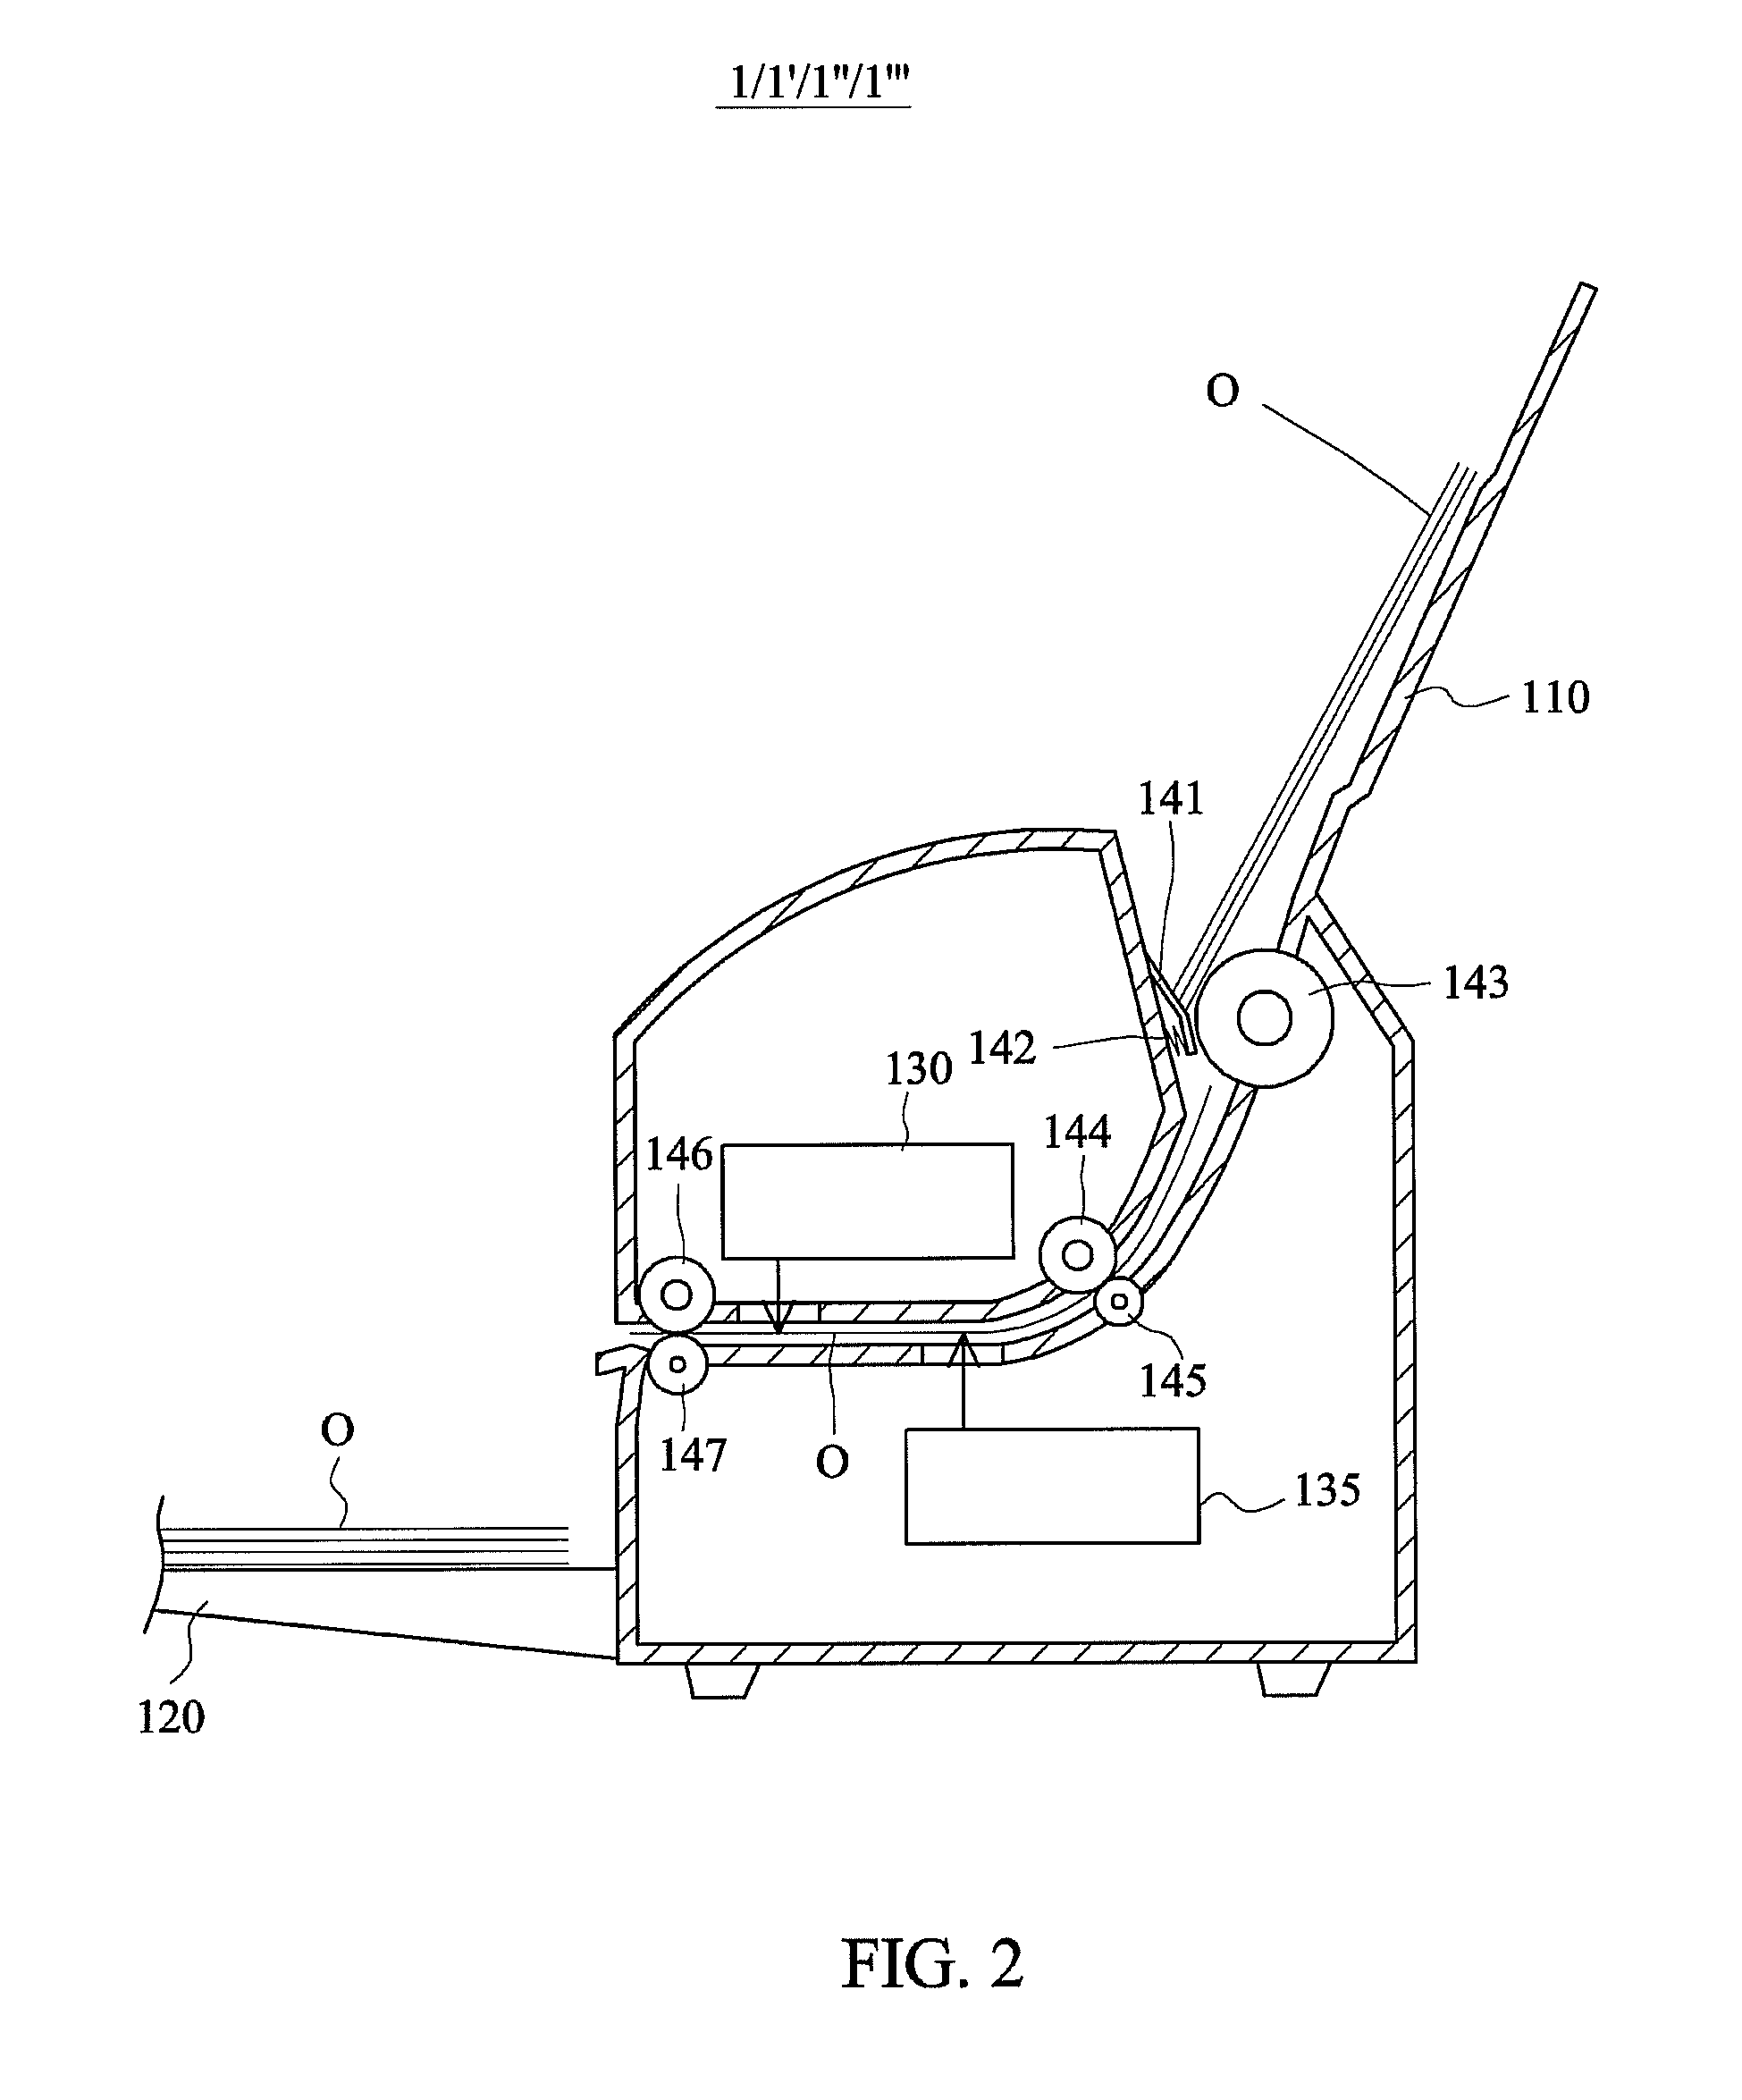 Duplex scanning apparatus with elastic pressing member disposed between two scan positions